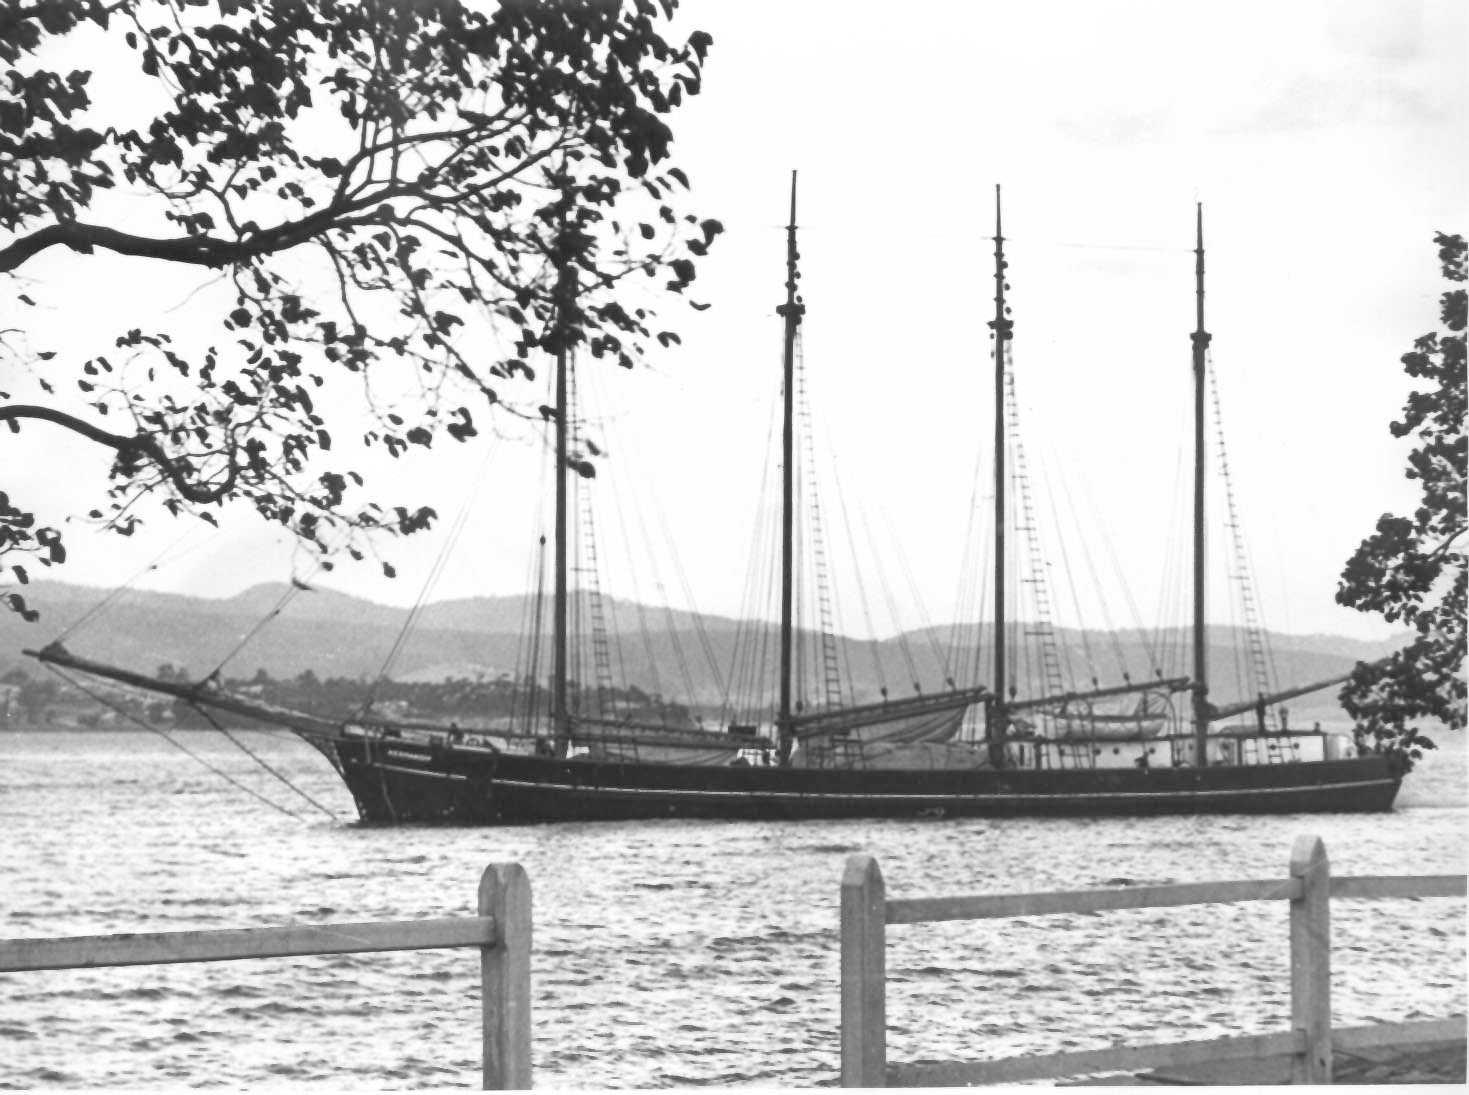 "Kermandie", the last four masted sailing ship to trade in Australian waters.  Built in 1920 by CM McKay of Hobart.  An auxilliary engined wooden schooner with a gross tonnage of 343.  This well known Tasmanian worked continuously until about 1946, often 